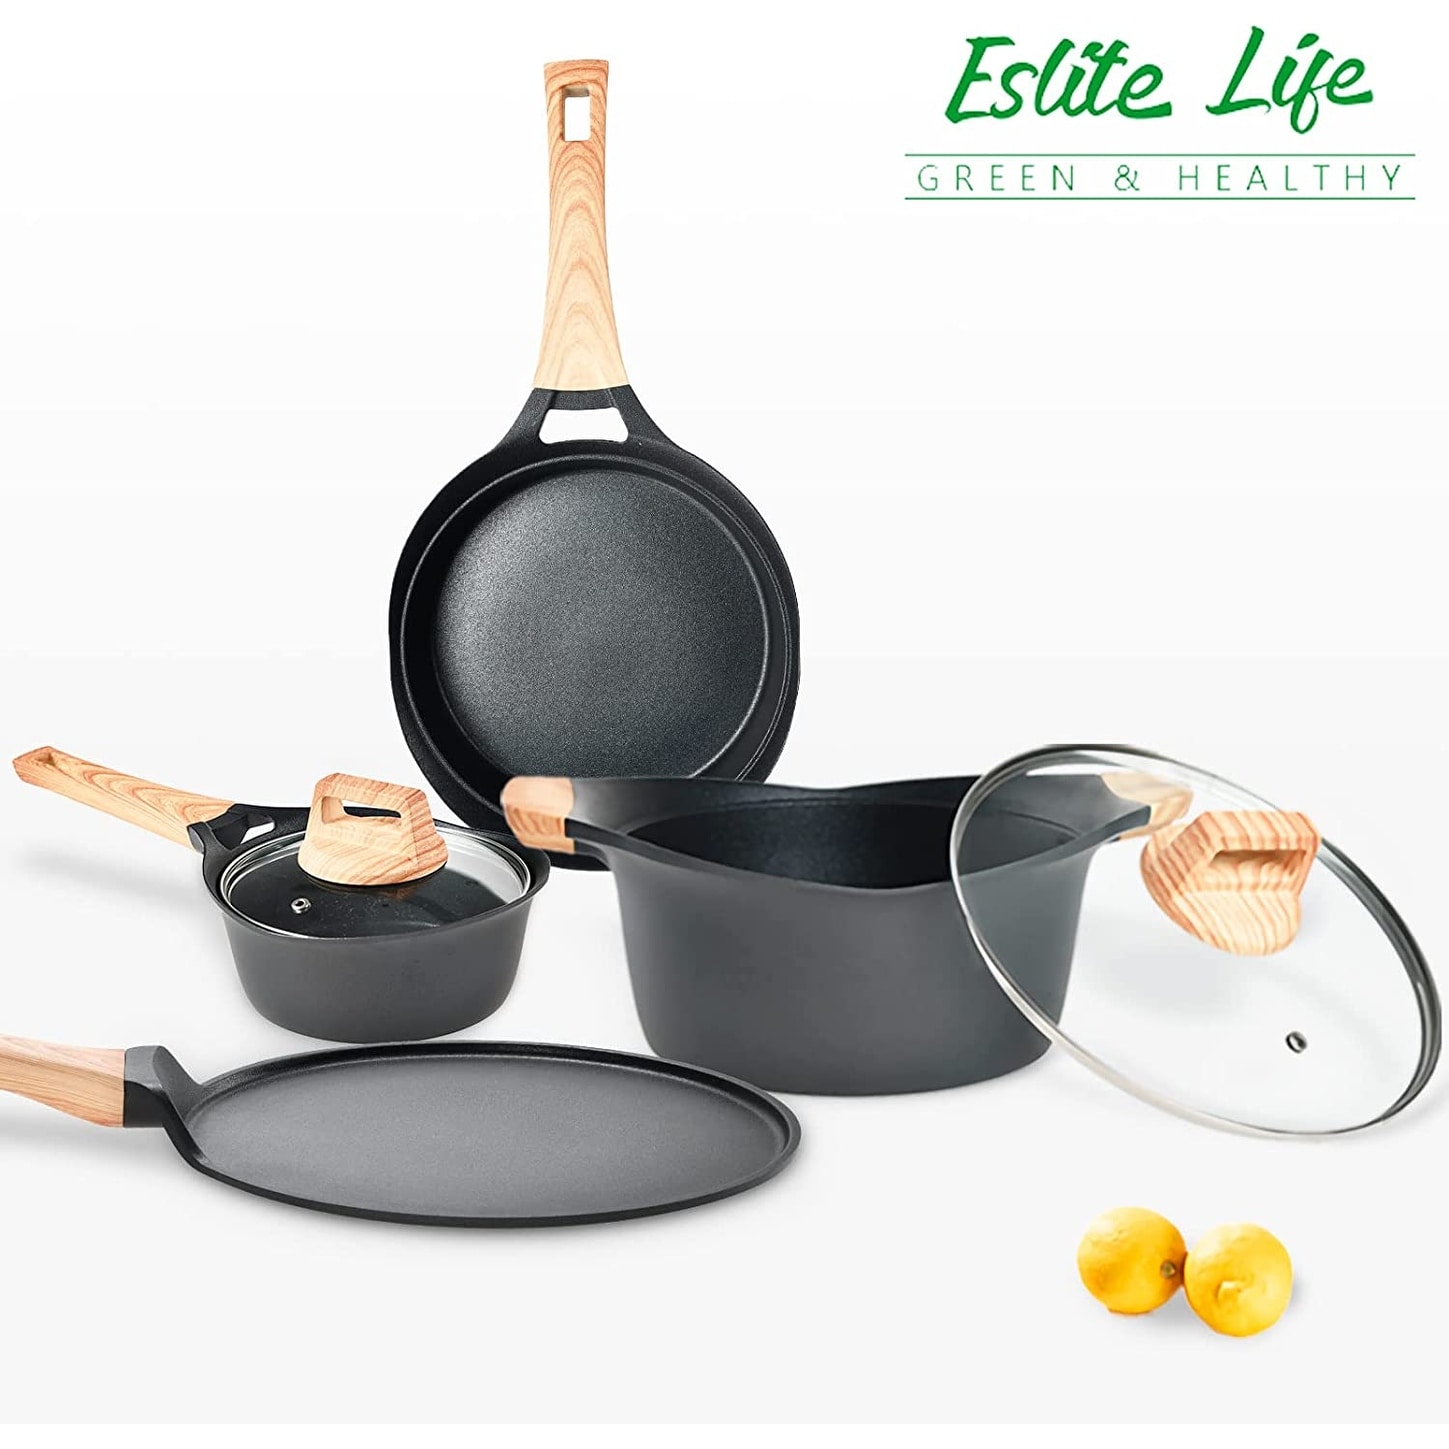 https://ak1.ostkcdn.com/images/products/is/images/direct/275954f8ac0f4f78ff58a2524ddef1cfd71e4af8/Cookware-Sets%2C-12-Pcs-Granite-Coating-Pots-and-Pans-Set-Kitchen-Cooking-Set.jpg